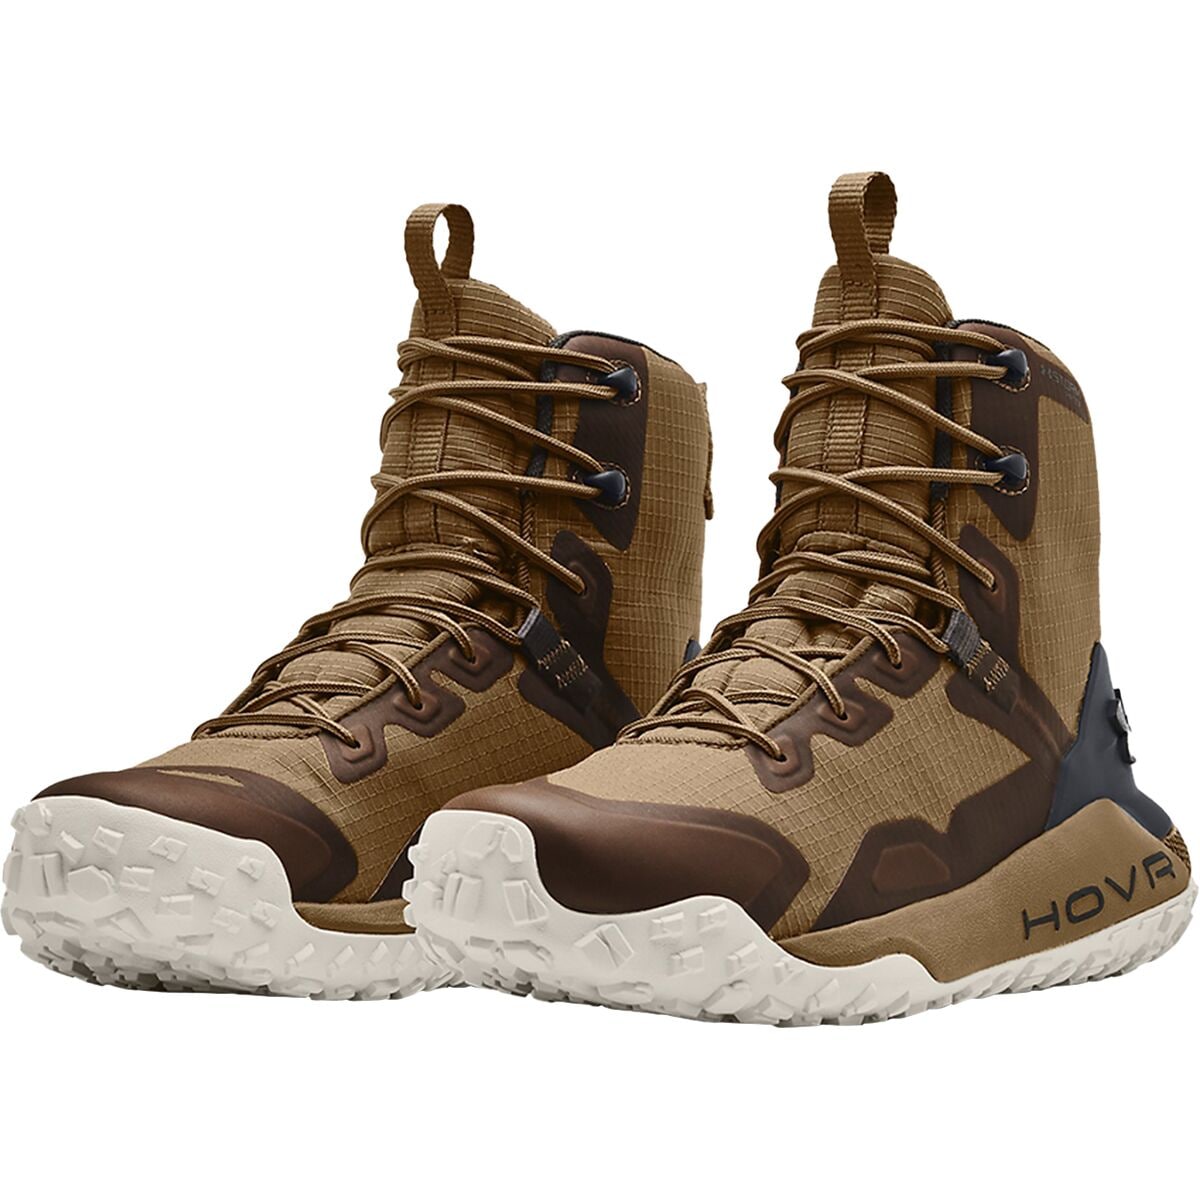 Under Armour HOVR Dawn WP Hiking Boot - Men's | eBay